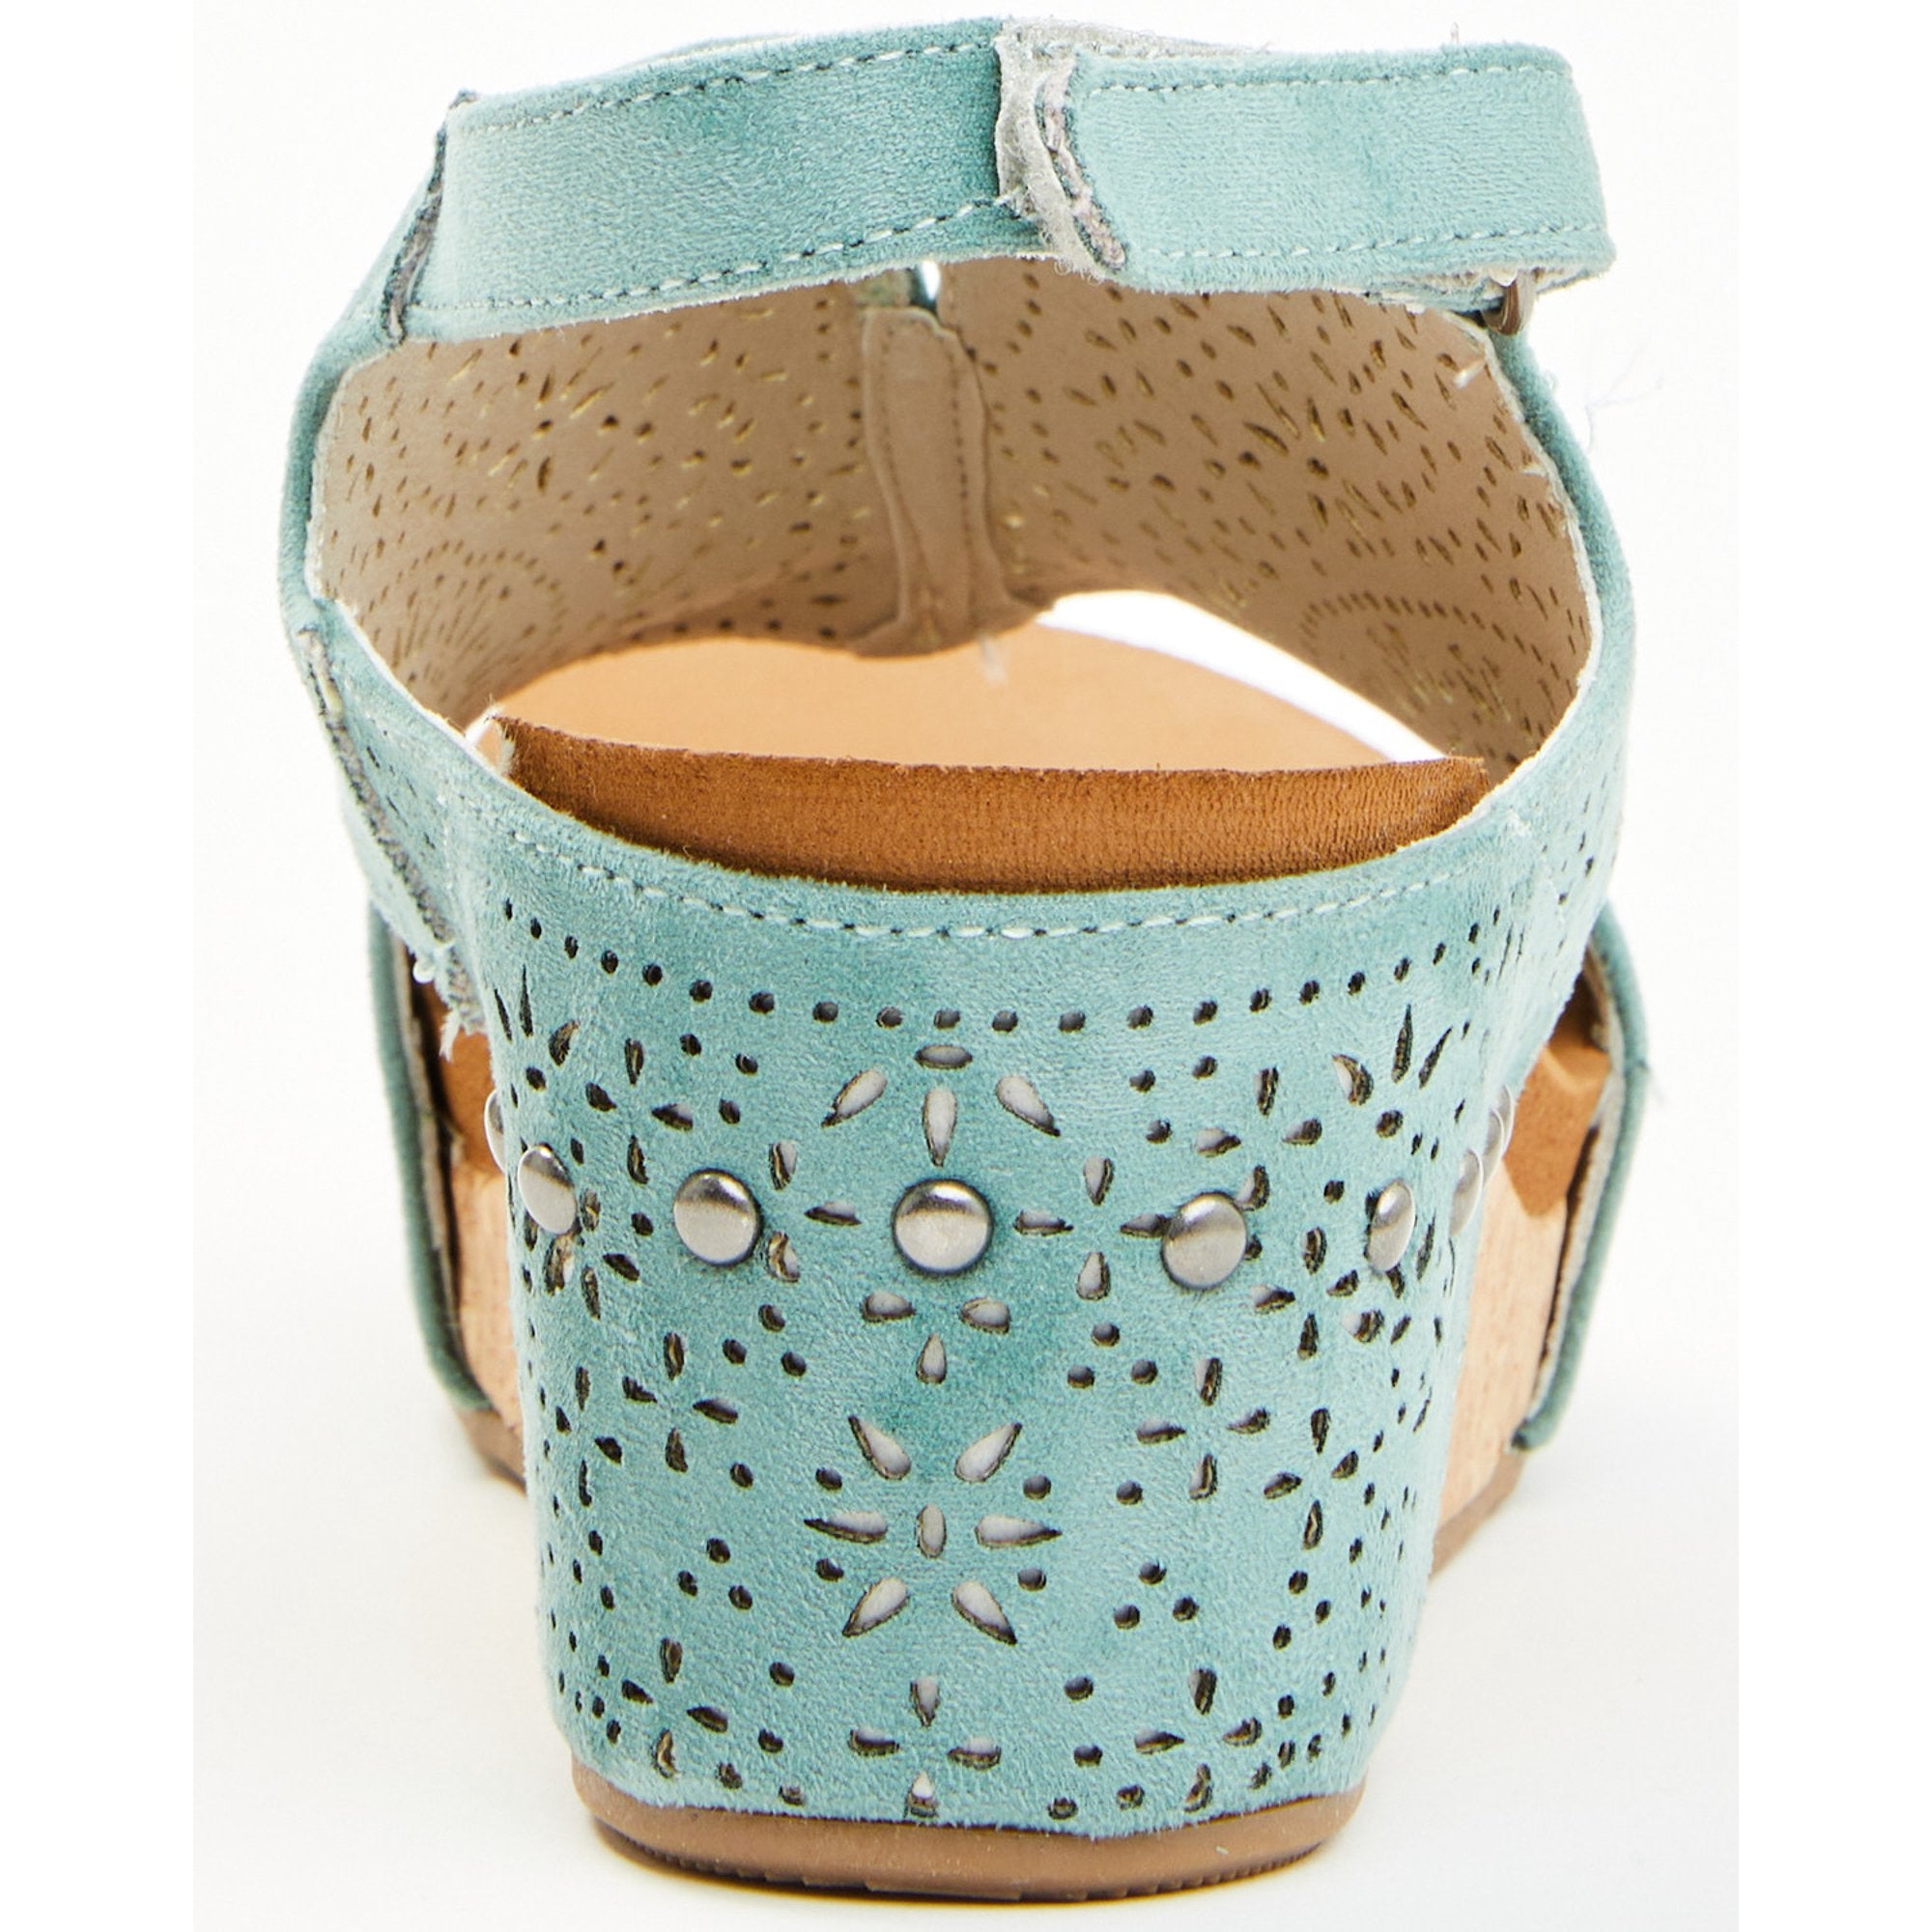 VERY G Free Fly 3 Laser Cut Wedge Sandal - Turquoise